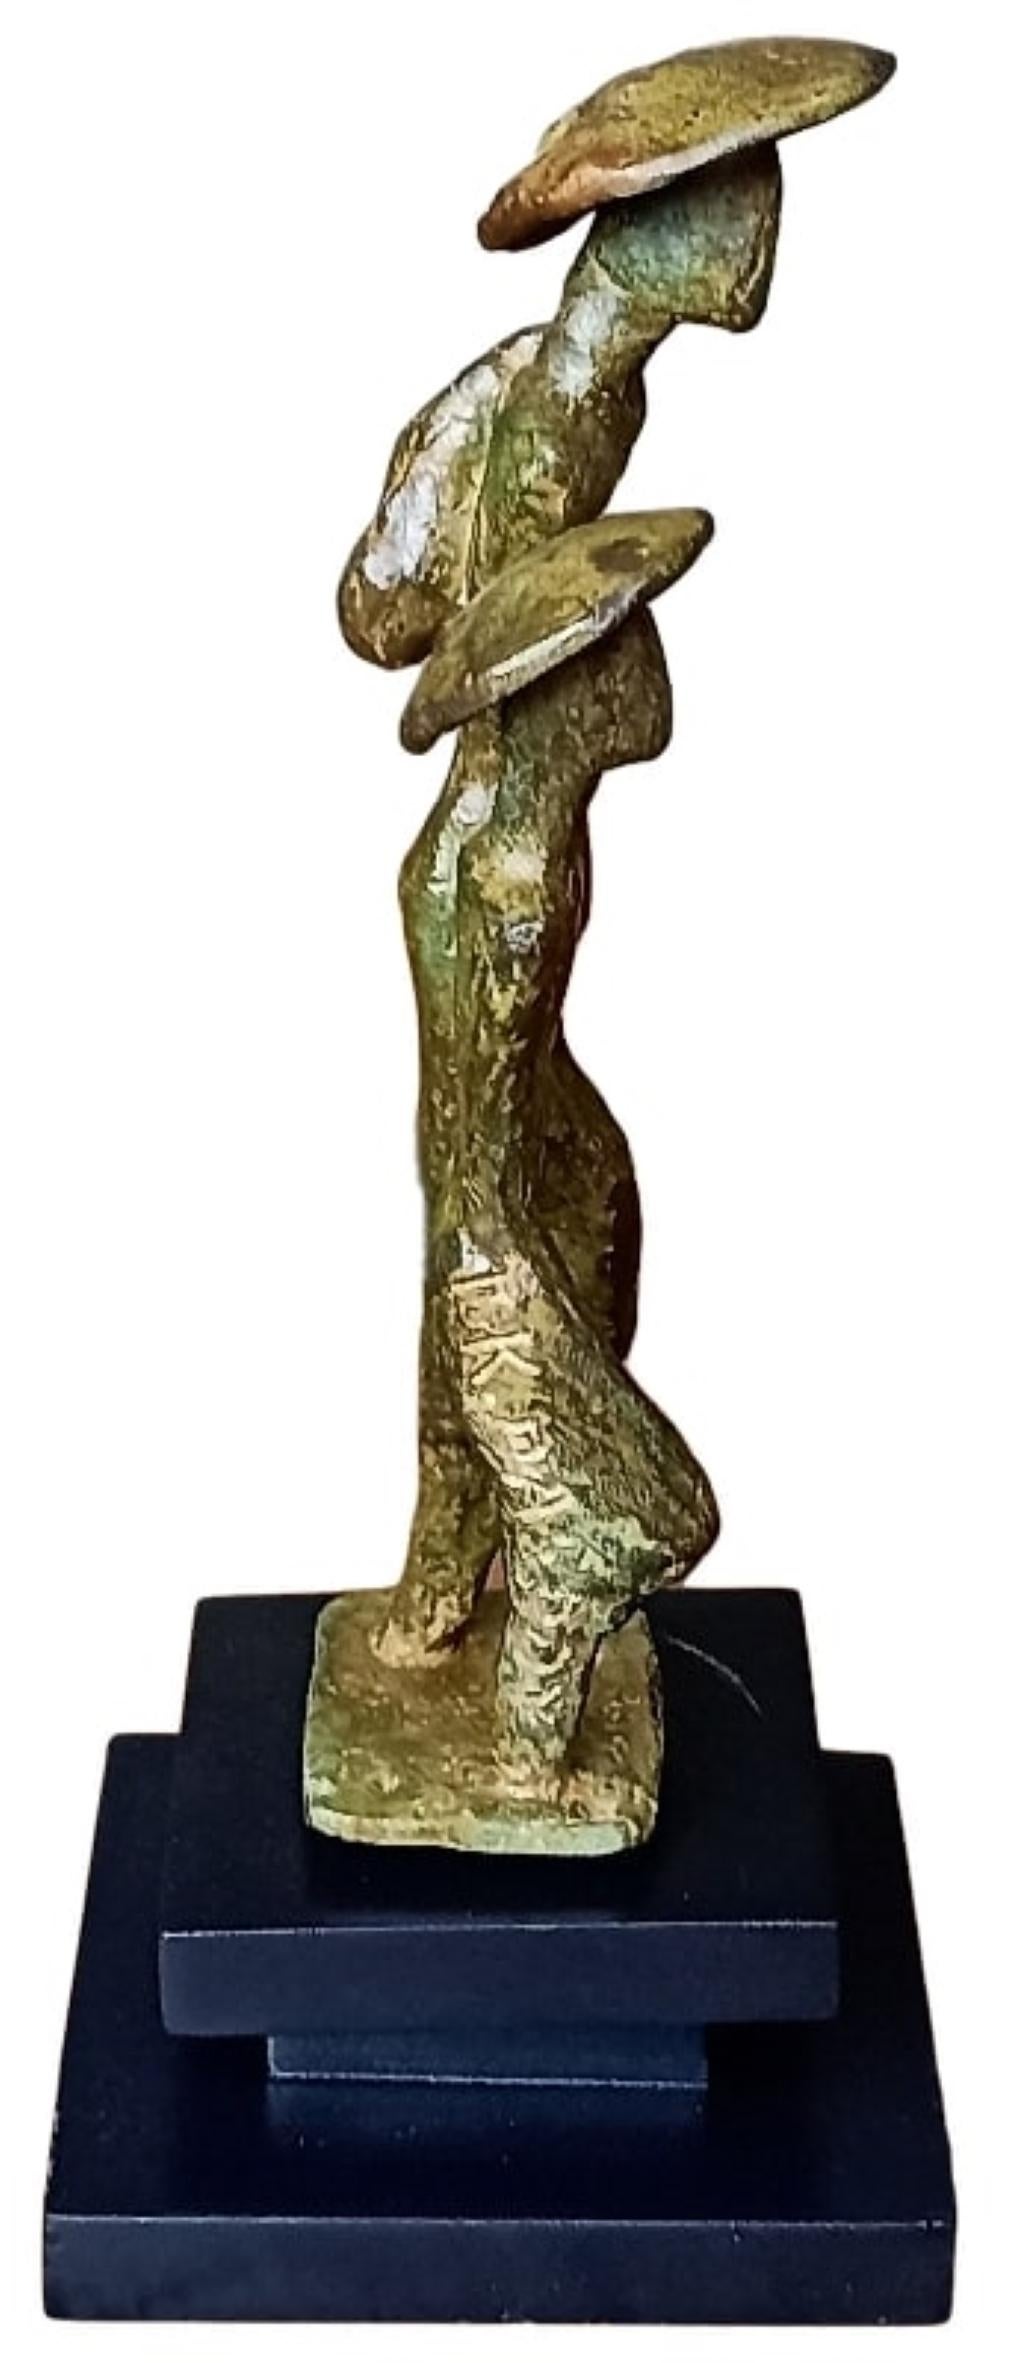 Tushar Kanti Das Roy - Untitled
H 7.75 x W 2.5 x D 2.25 inches (Without Stand)
H 9.5 x W 4 x D 4 inches (With Stand)
Bronze Sculpture

About the Artist & his work :
Born : 1968.
Education : He has completed his education from I.C.Art & Craft at